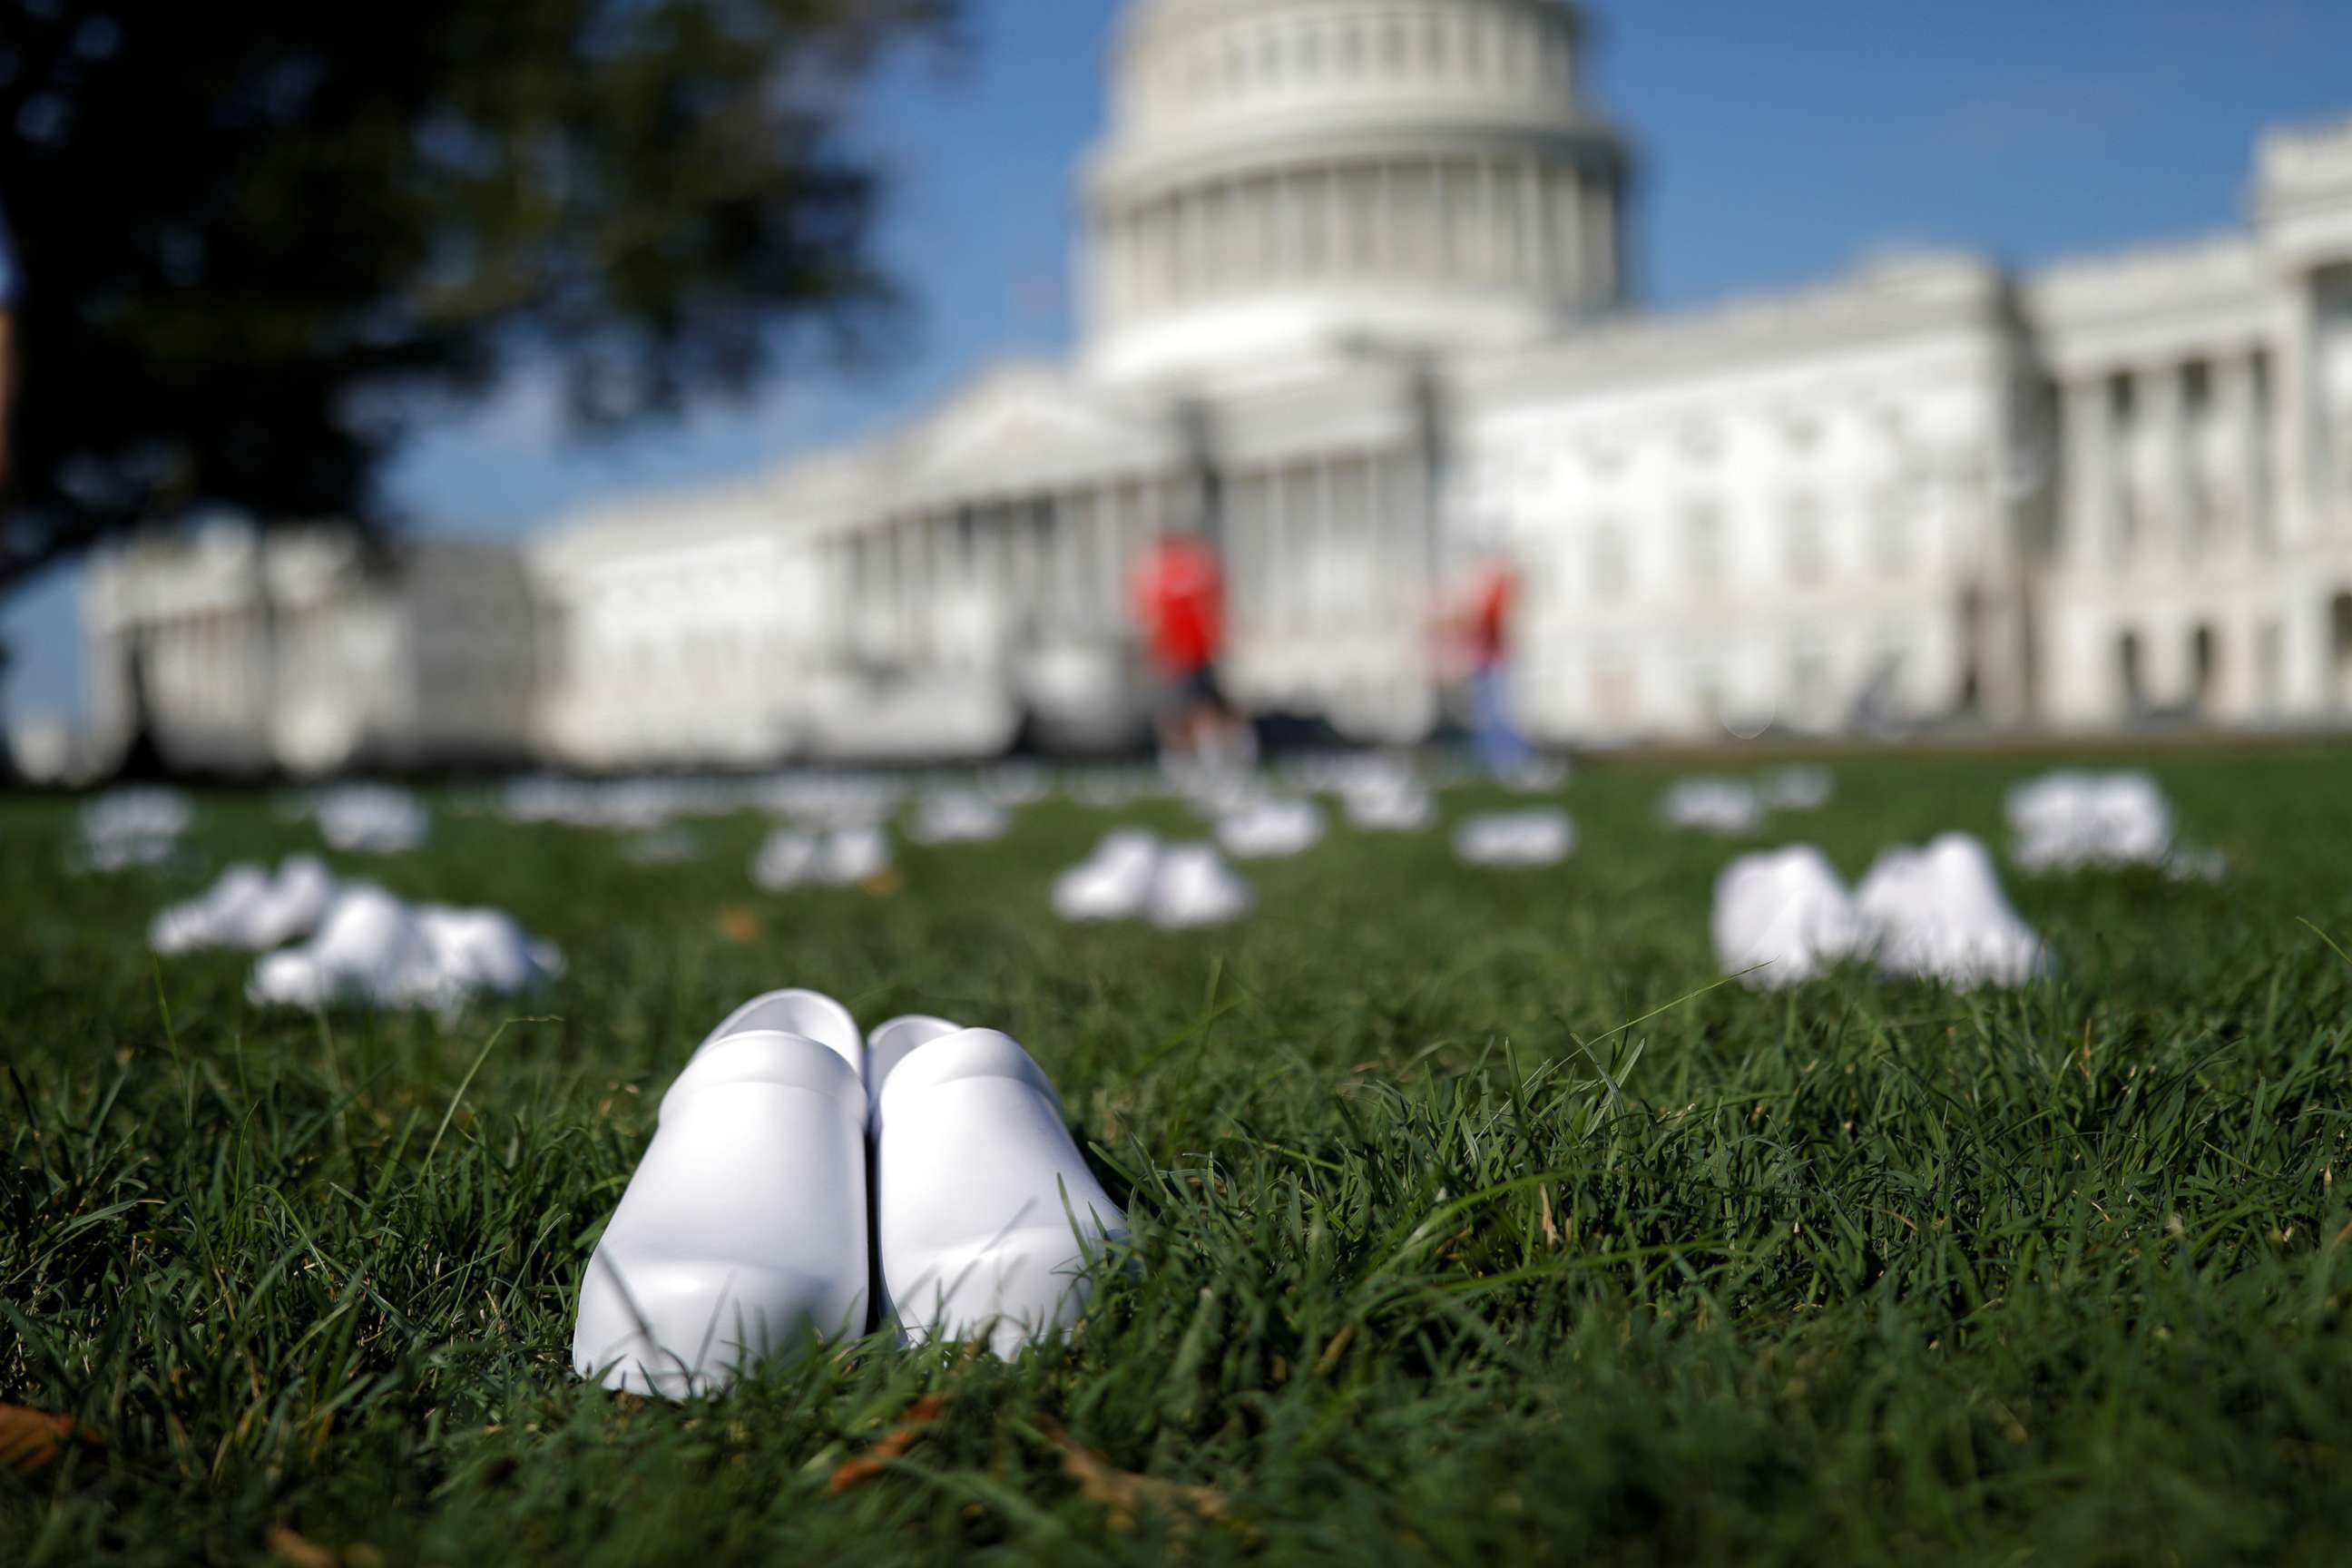 PHOTO: White shoes are displayed during a demonstration by Registered Nurses and the National Nurses United (NNU) members, during a protest on Capitol Hill in Washington, D.C., July 21, 2020.